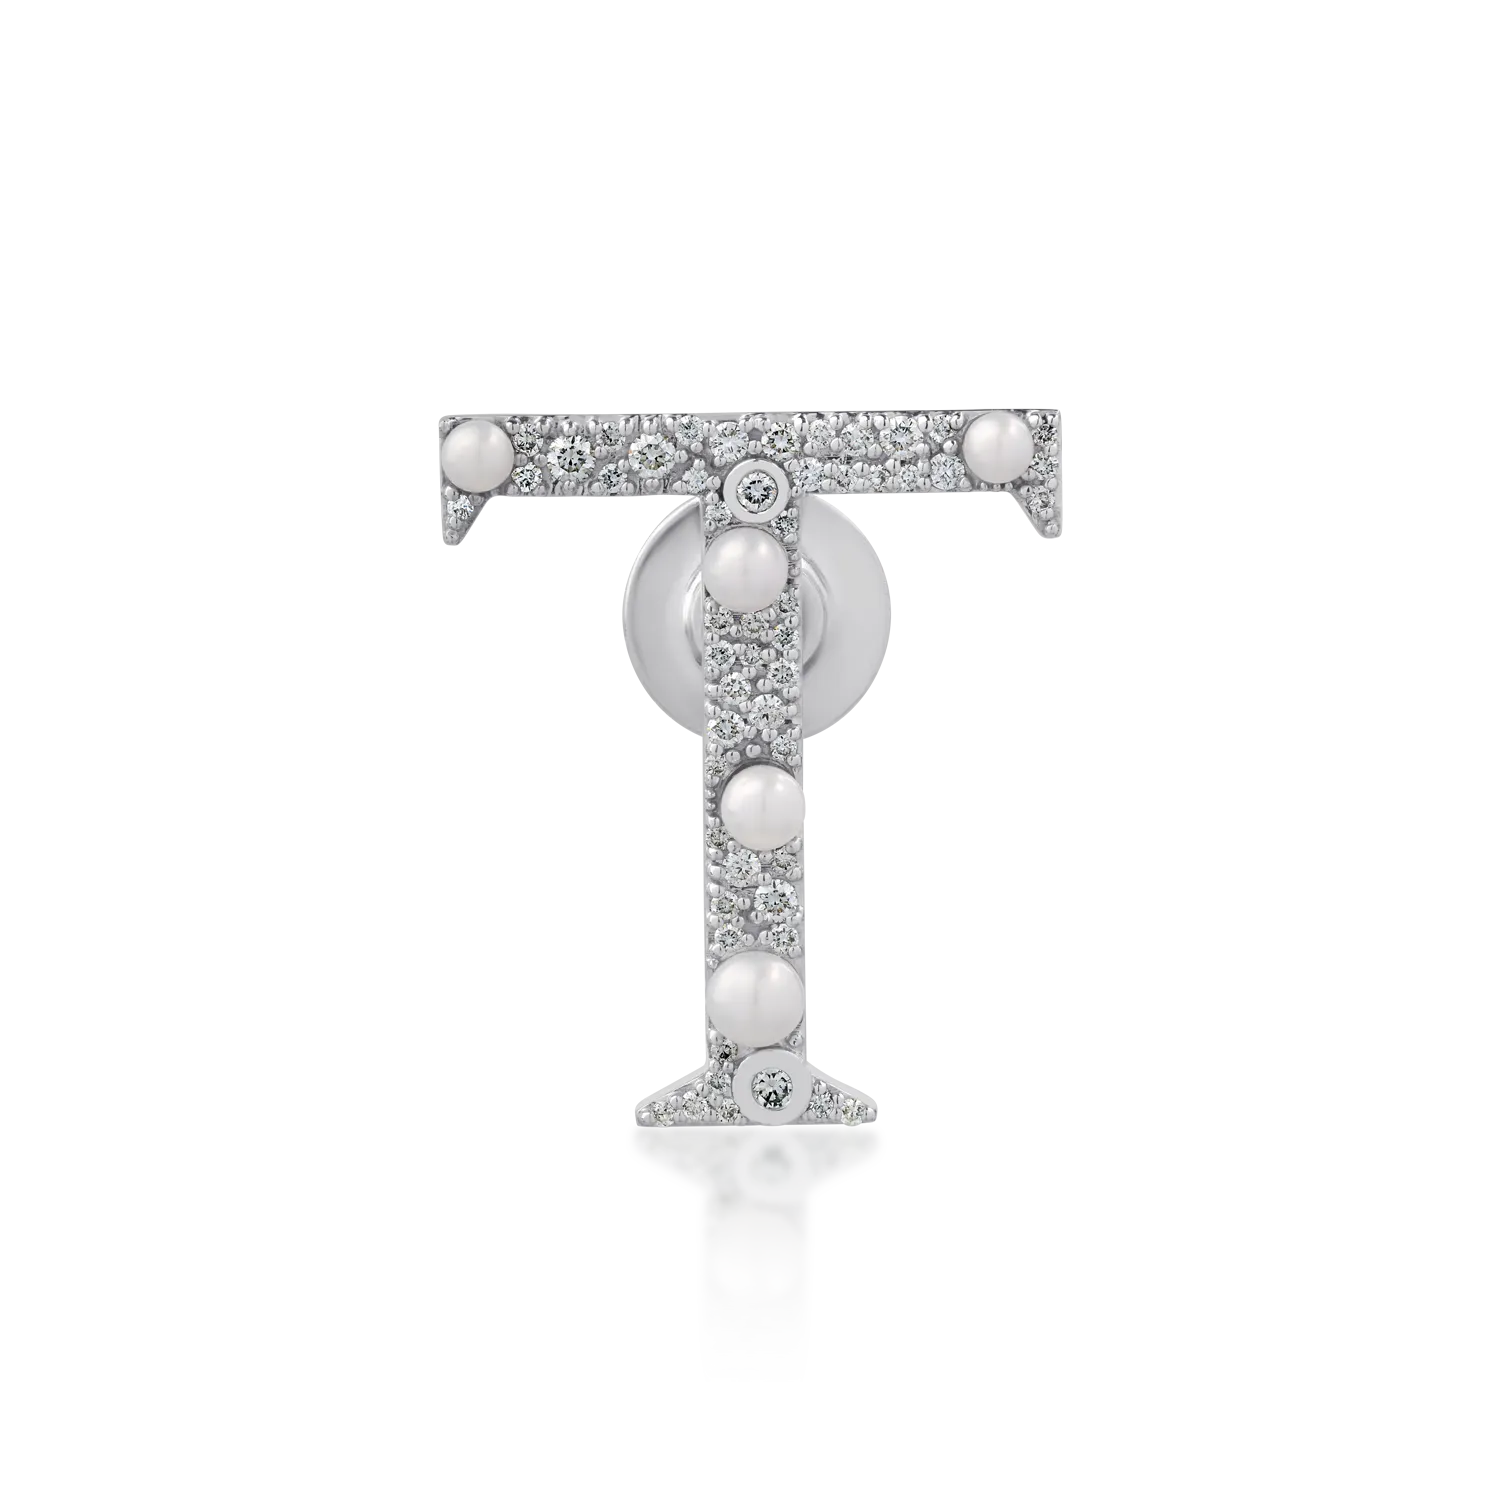 18K white gold brooch with 0.87ct fresh water pearls and 0.36ct diamonds